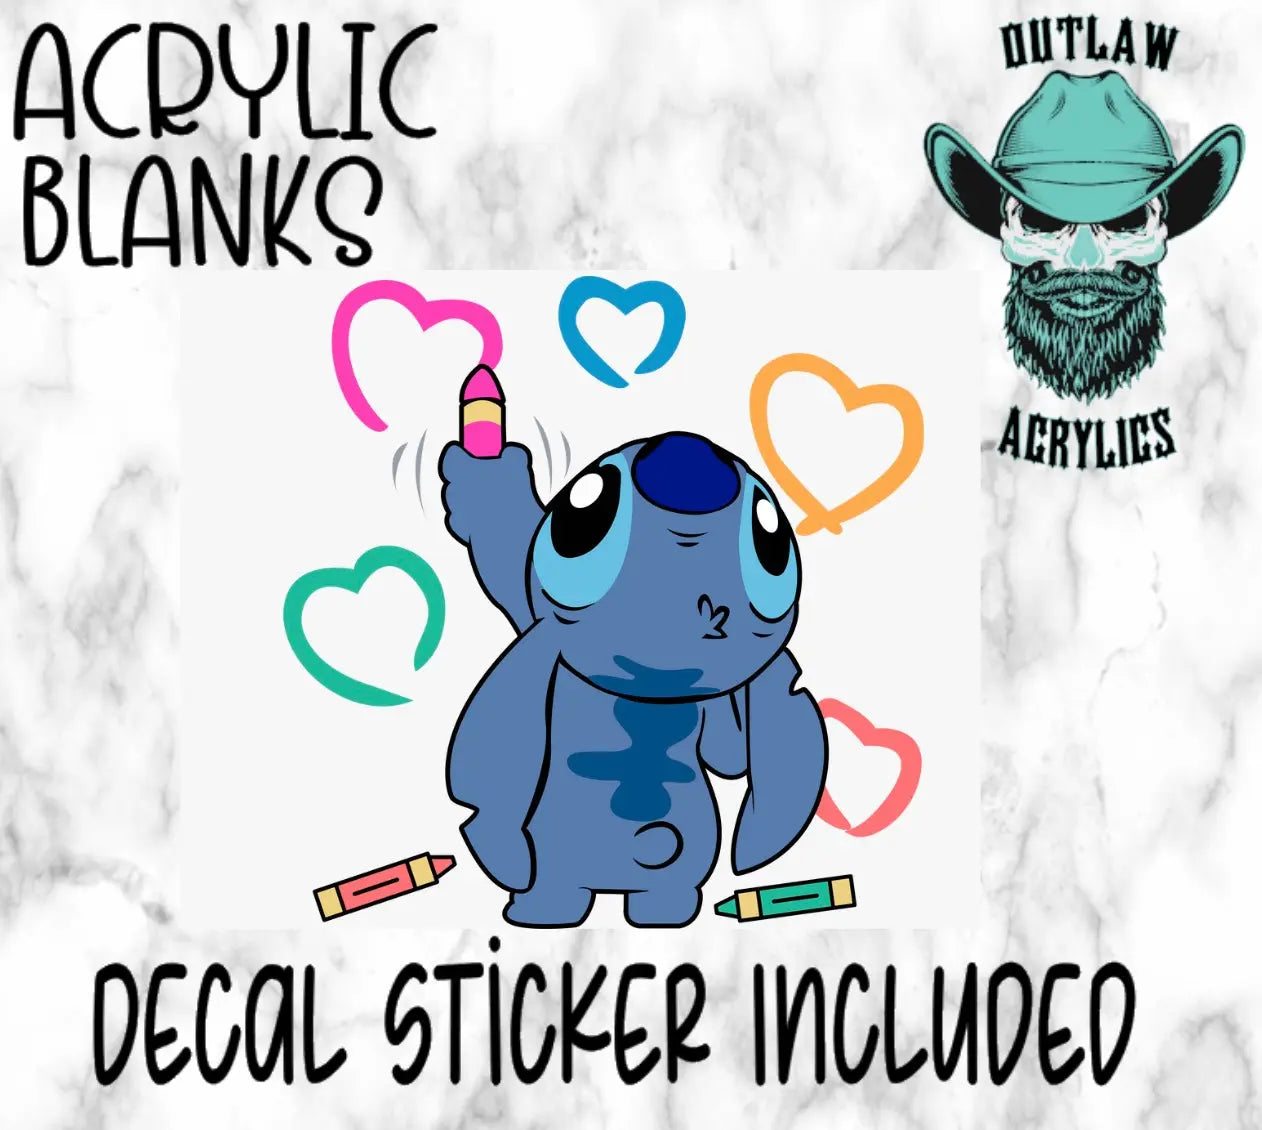 Coloring Stitch Acrylic & Decal Set - Outlaw Acrylics